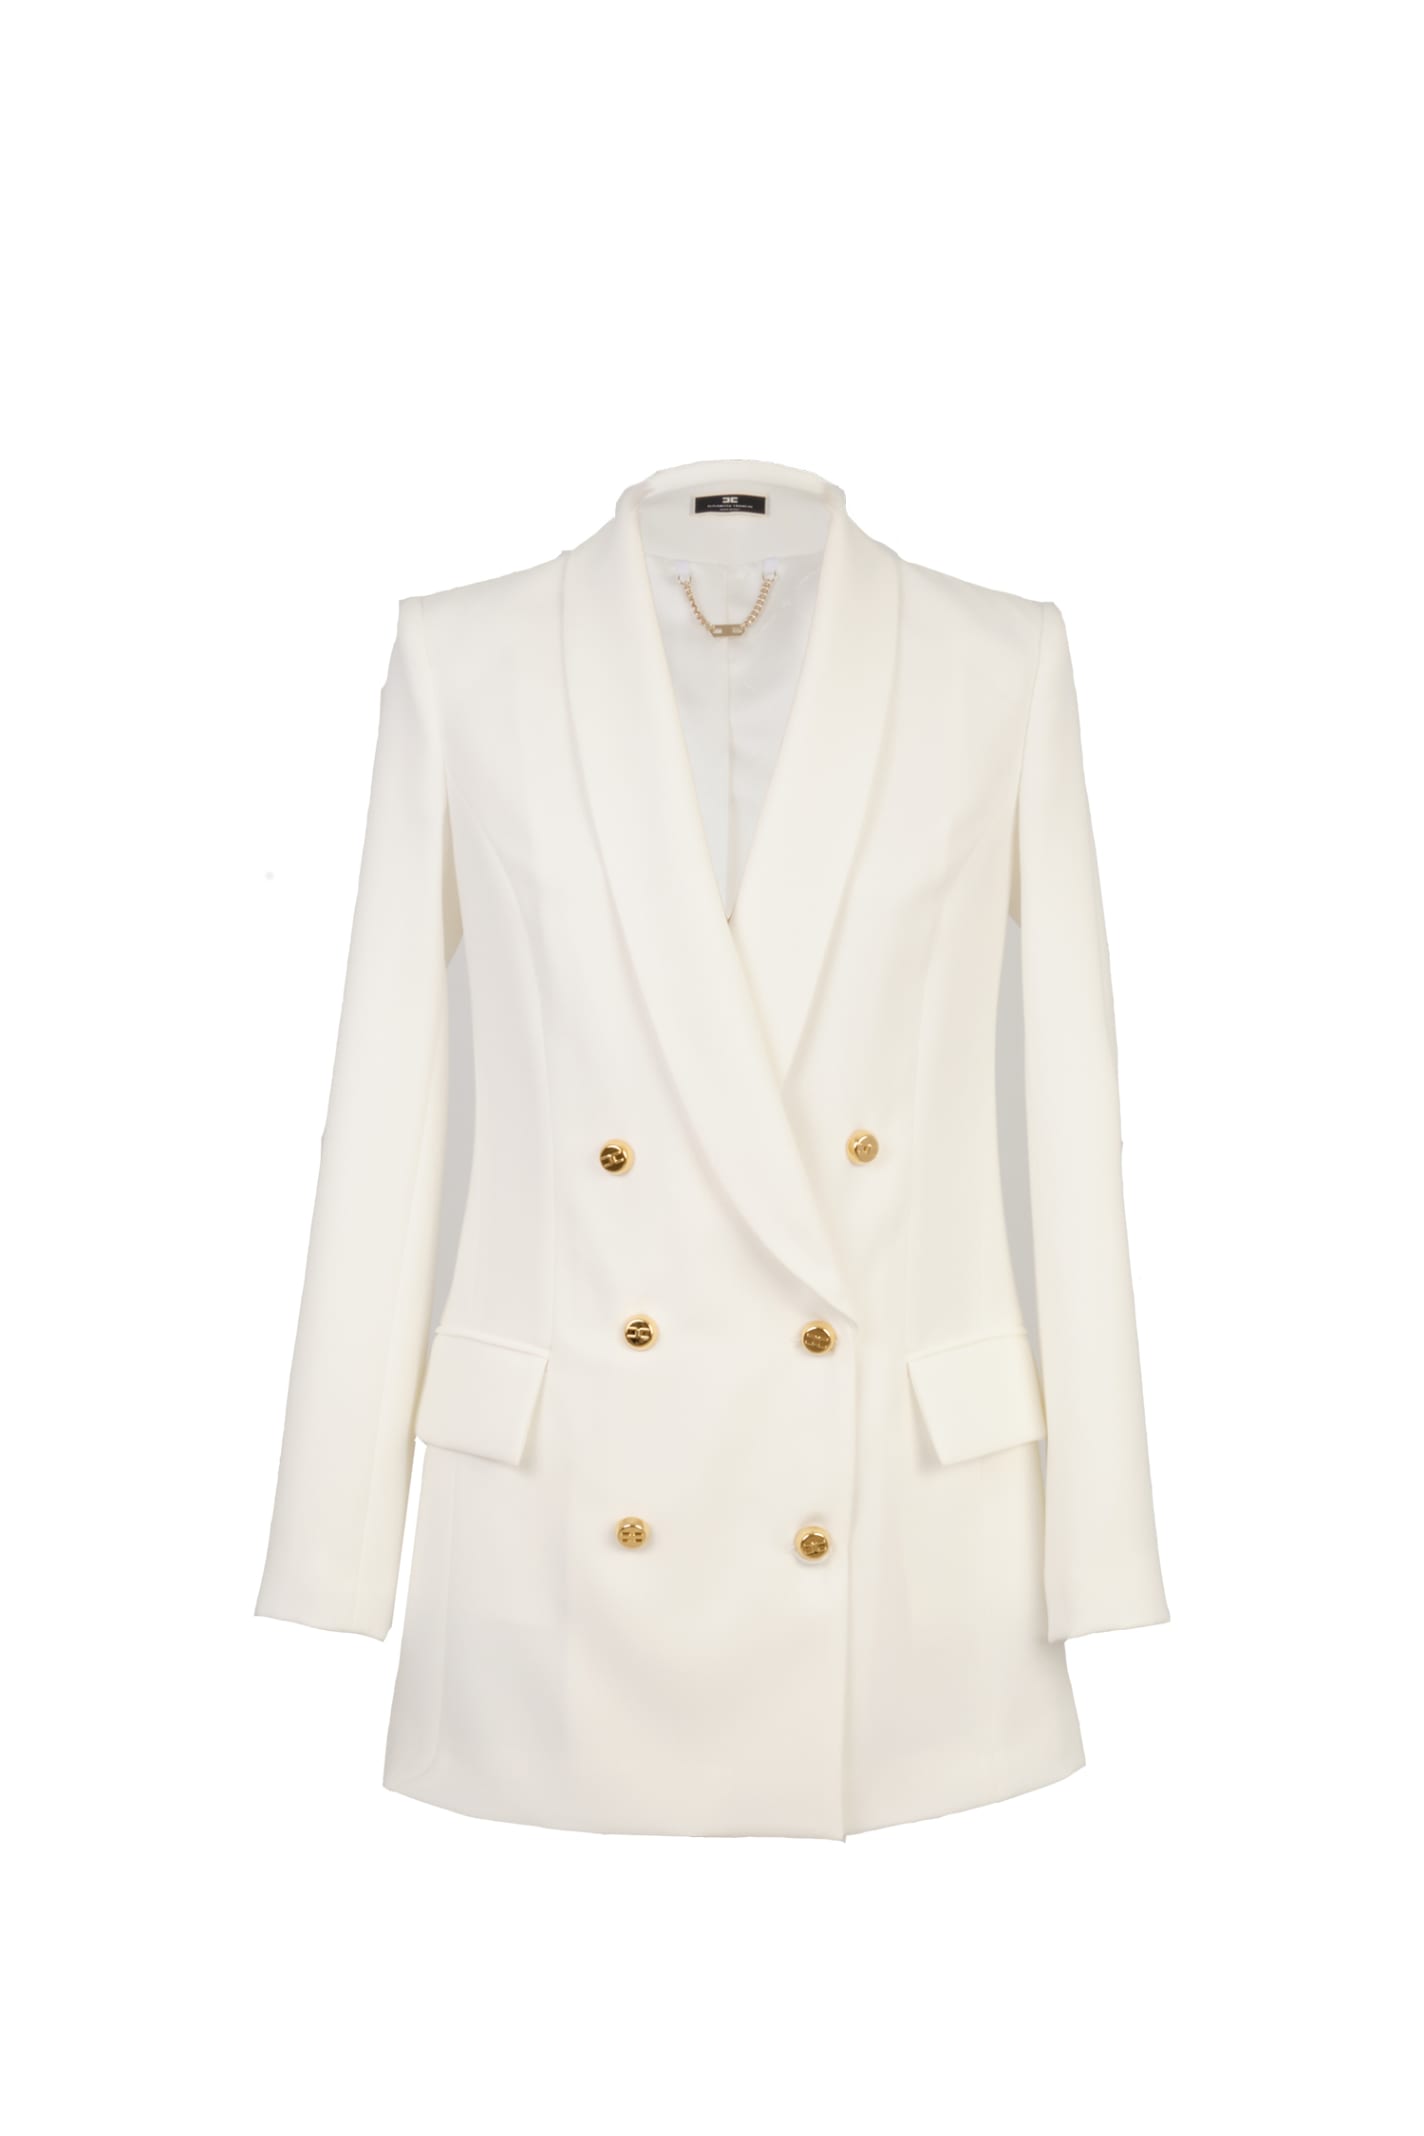 Elisabetta Franchi Long Jacket With Gold Buttons